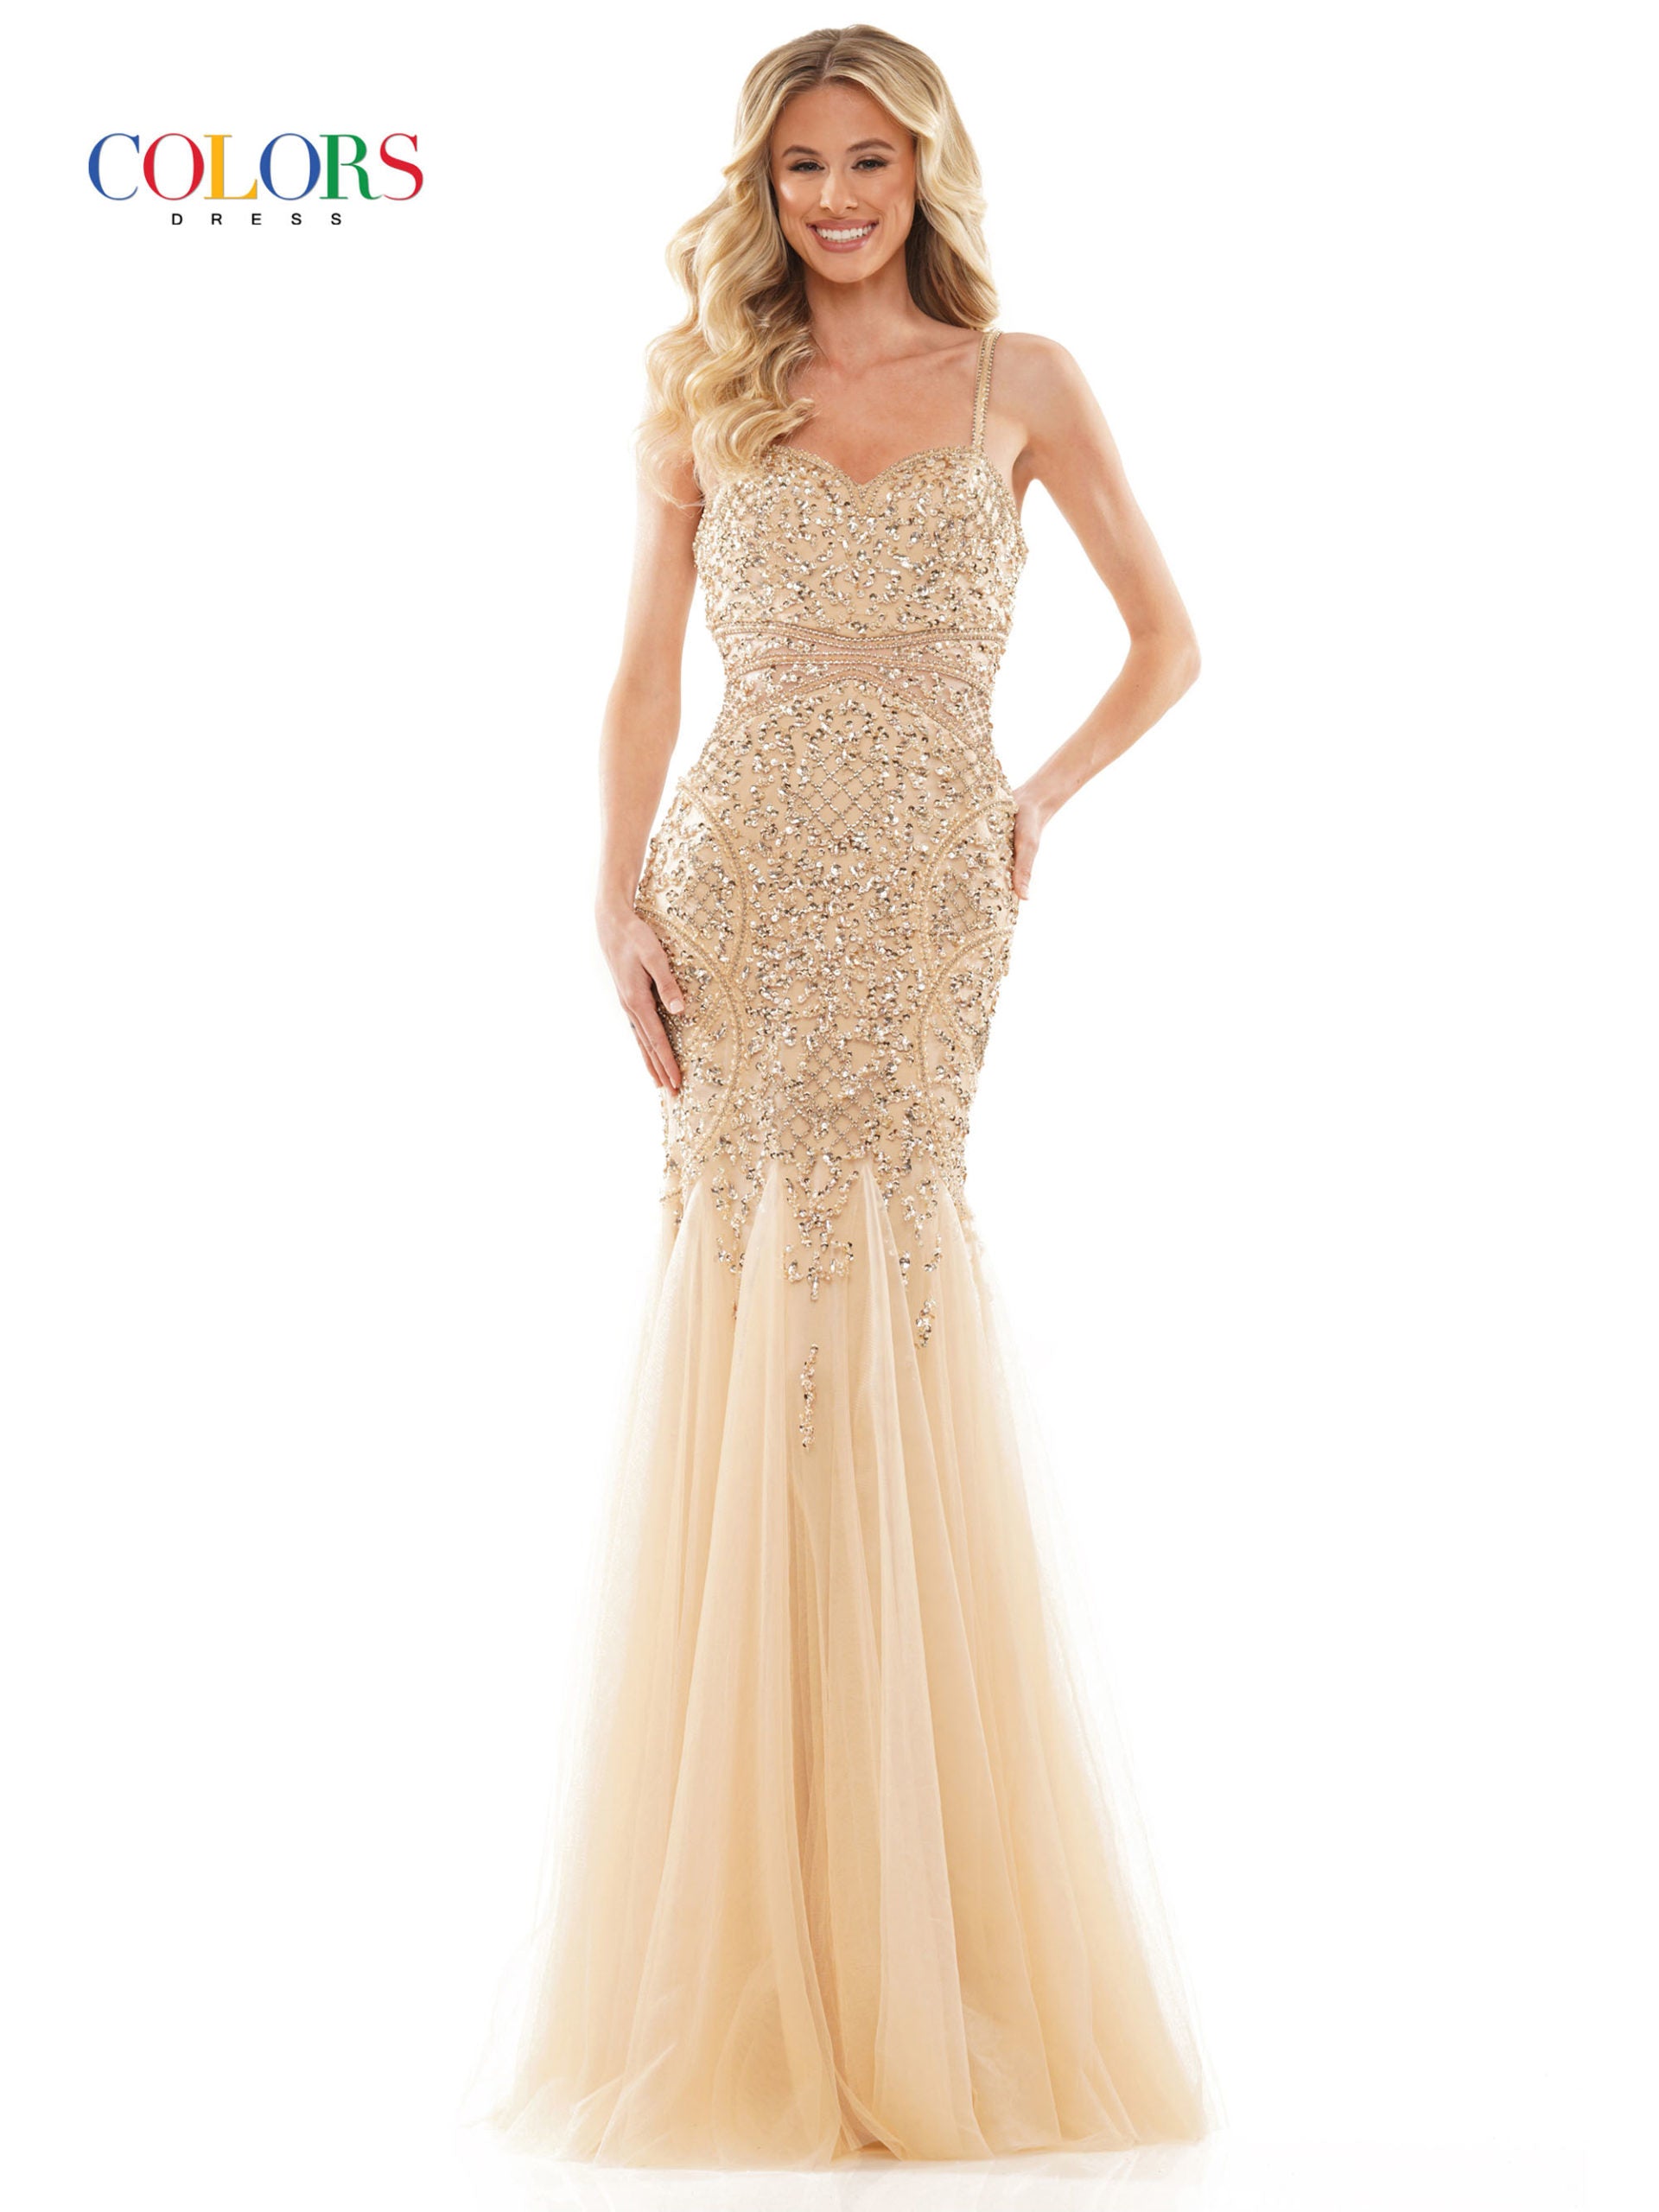 Colors Dress 2230 Gold Mermaid Prom or Evening dress with an all over delicately beaded bodice mermaid dress in sweet heart neckline, tulle godet, beaded strap